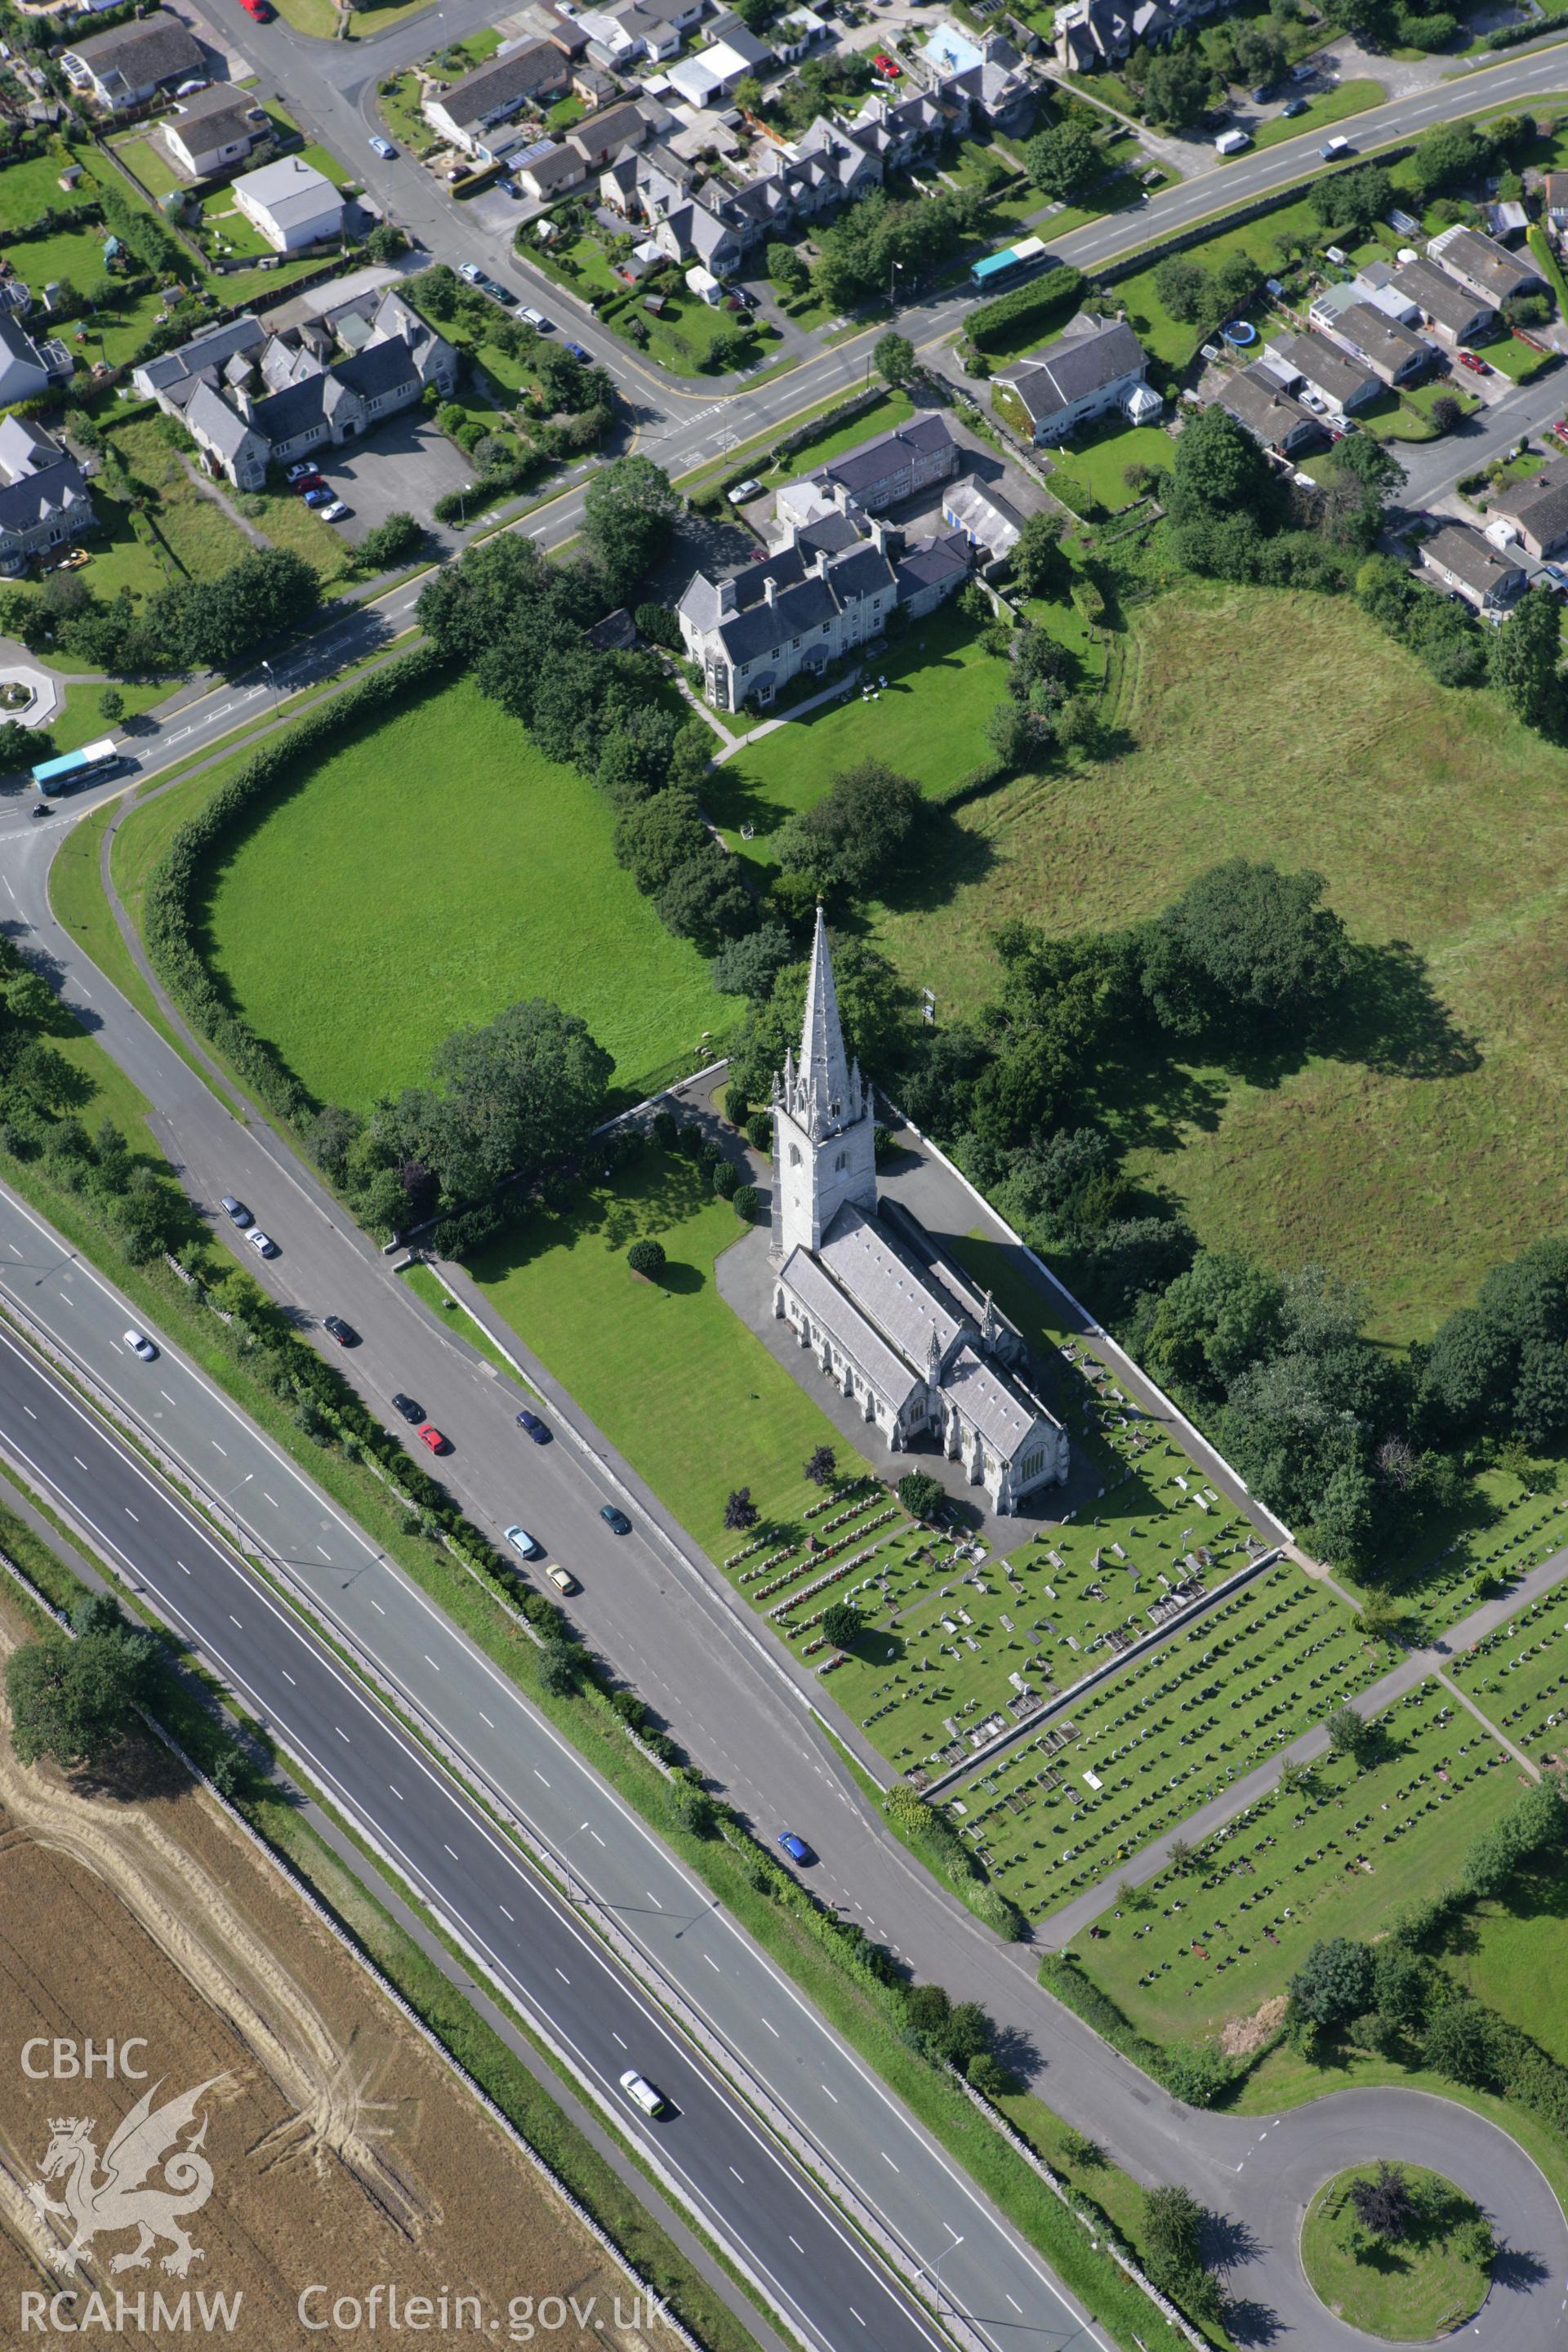 RCAHMW colour oblique aerial photograph of St Margaret's Church (The Marble Church), Bodelwyddan. Taken on 31 July 2007 by Toby Driver